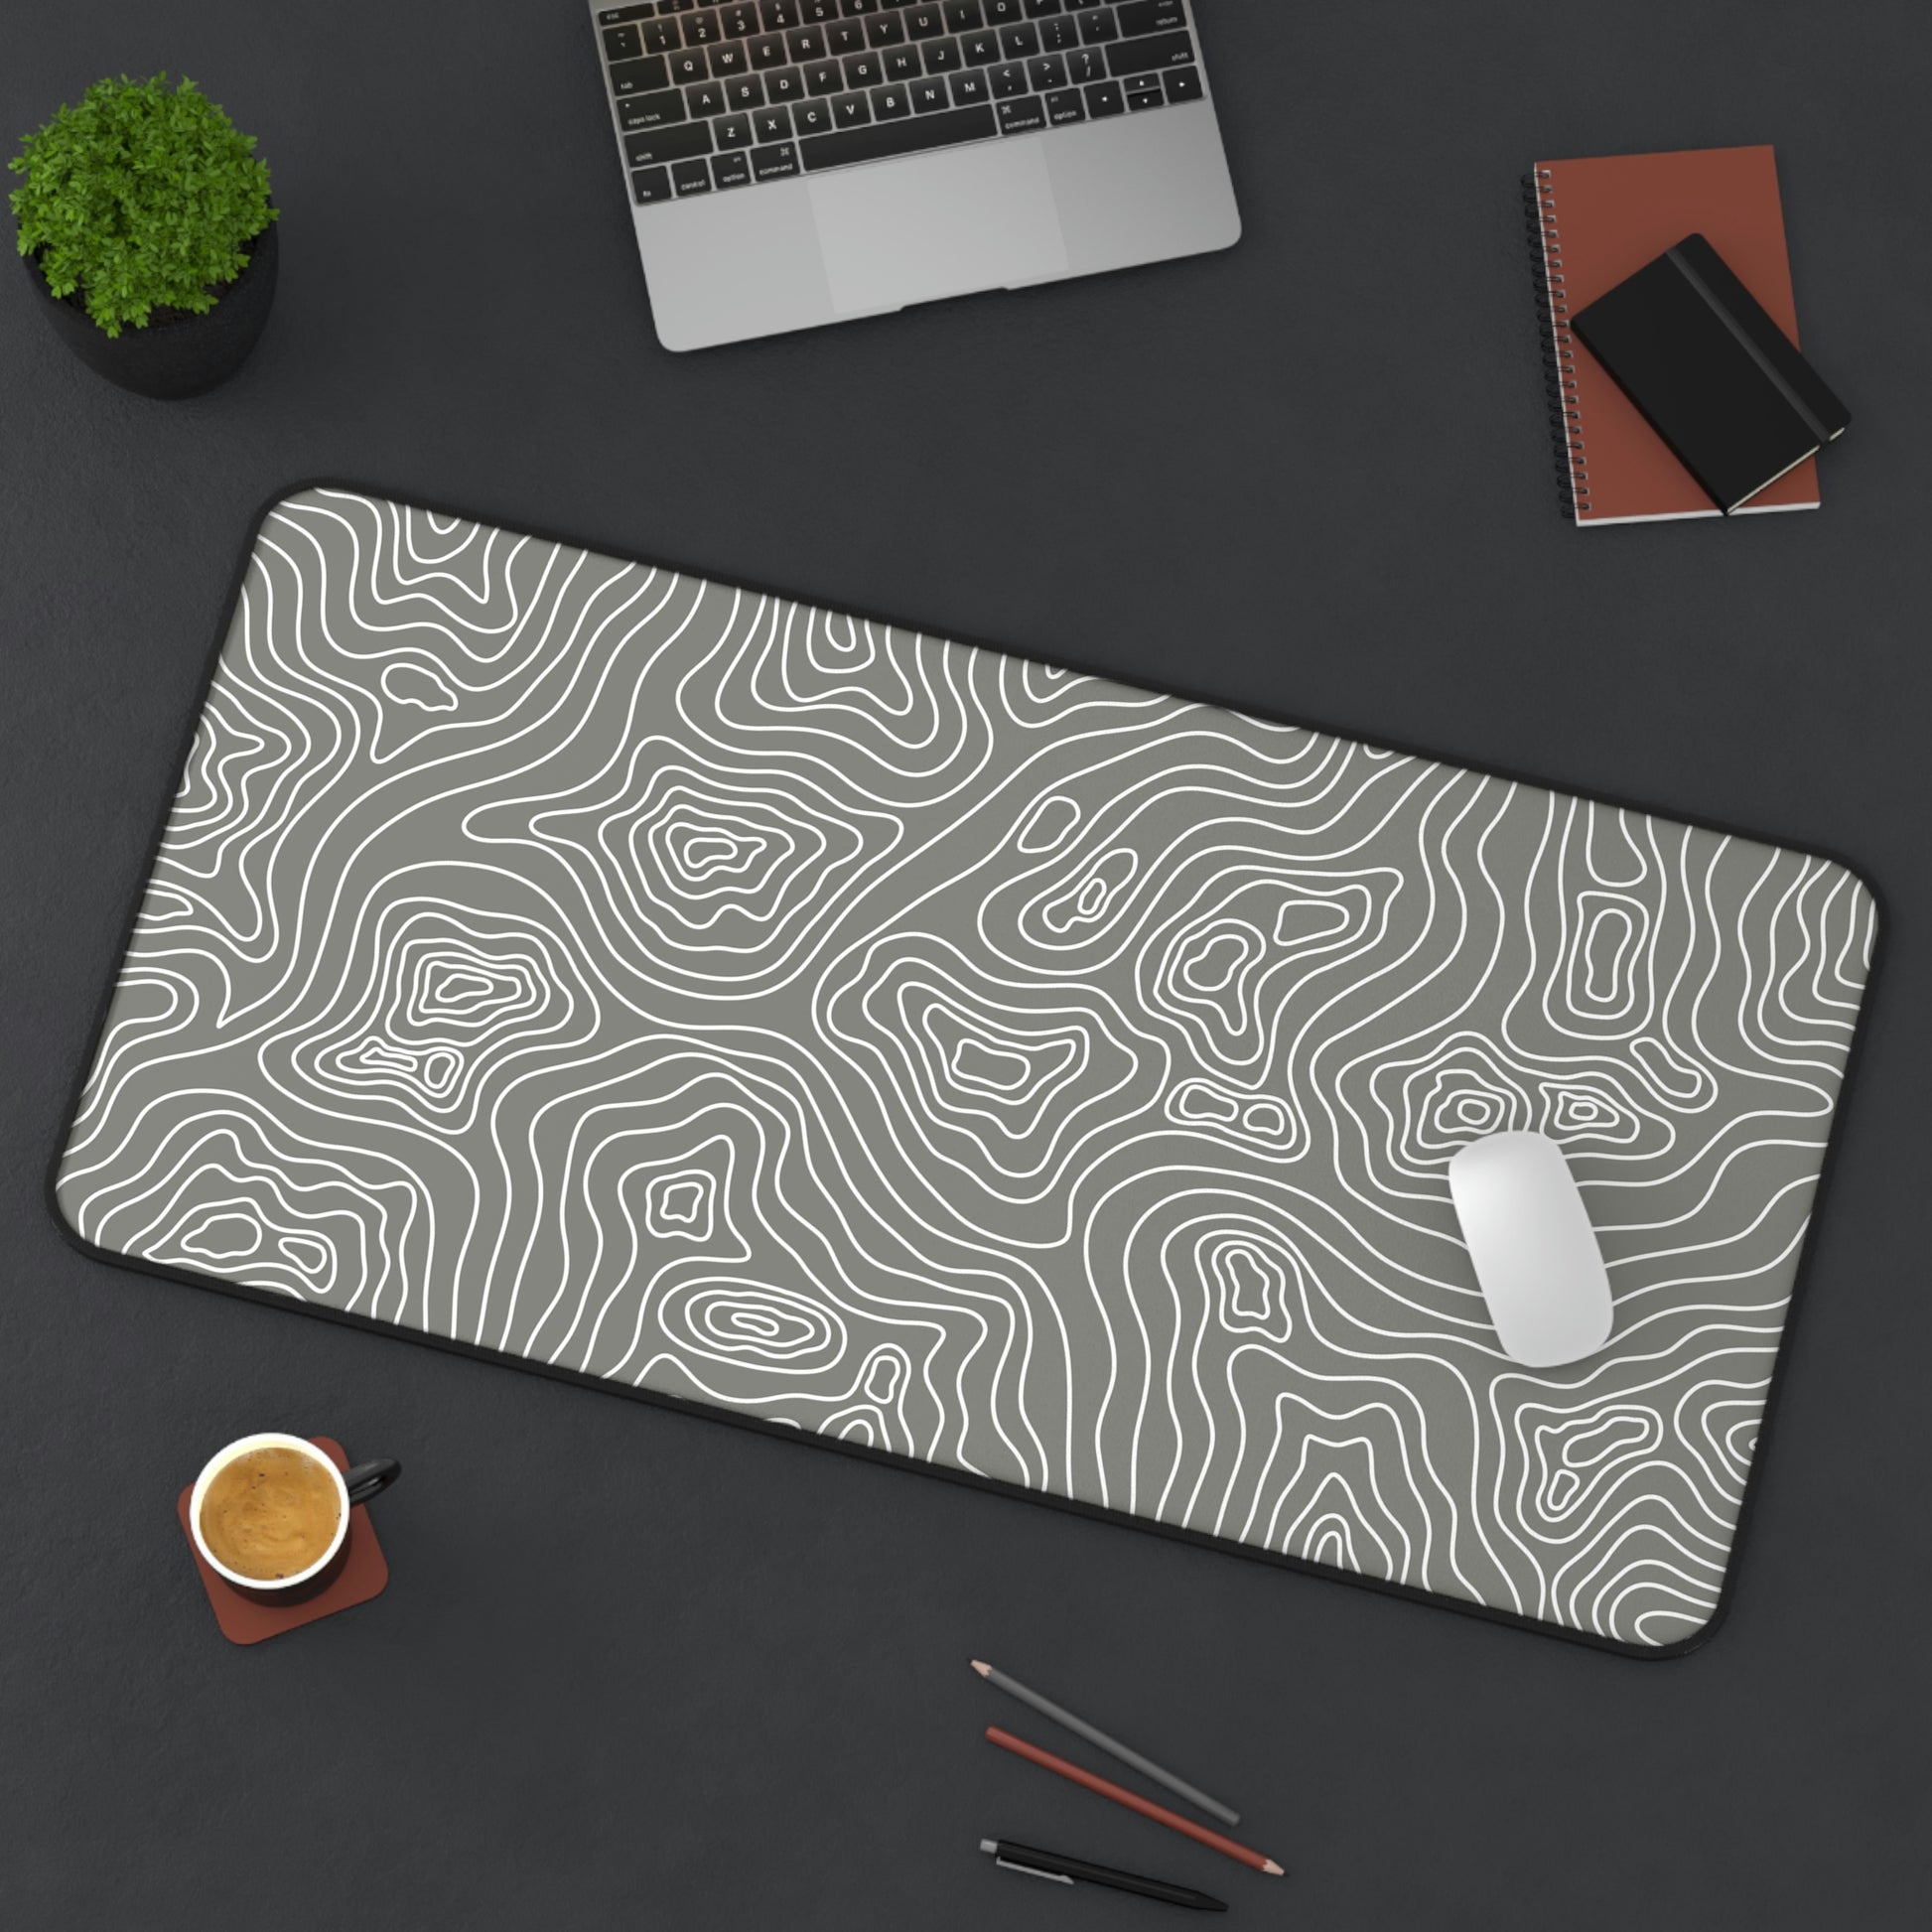 A 31" x 15.5" gray desk mat with white topographic lines sitting at an angle. A mouse sits on top of it.